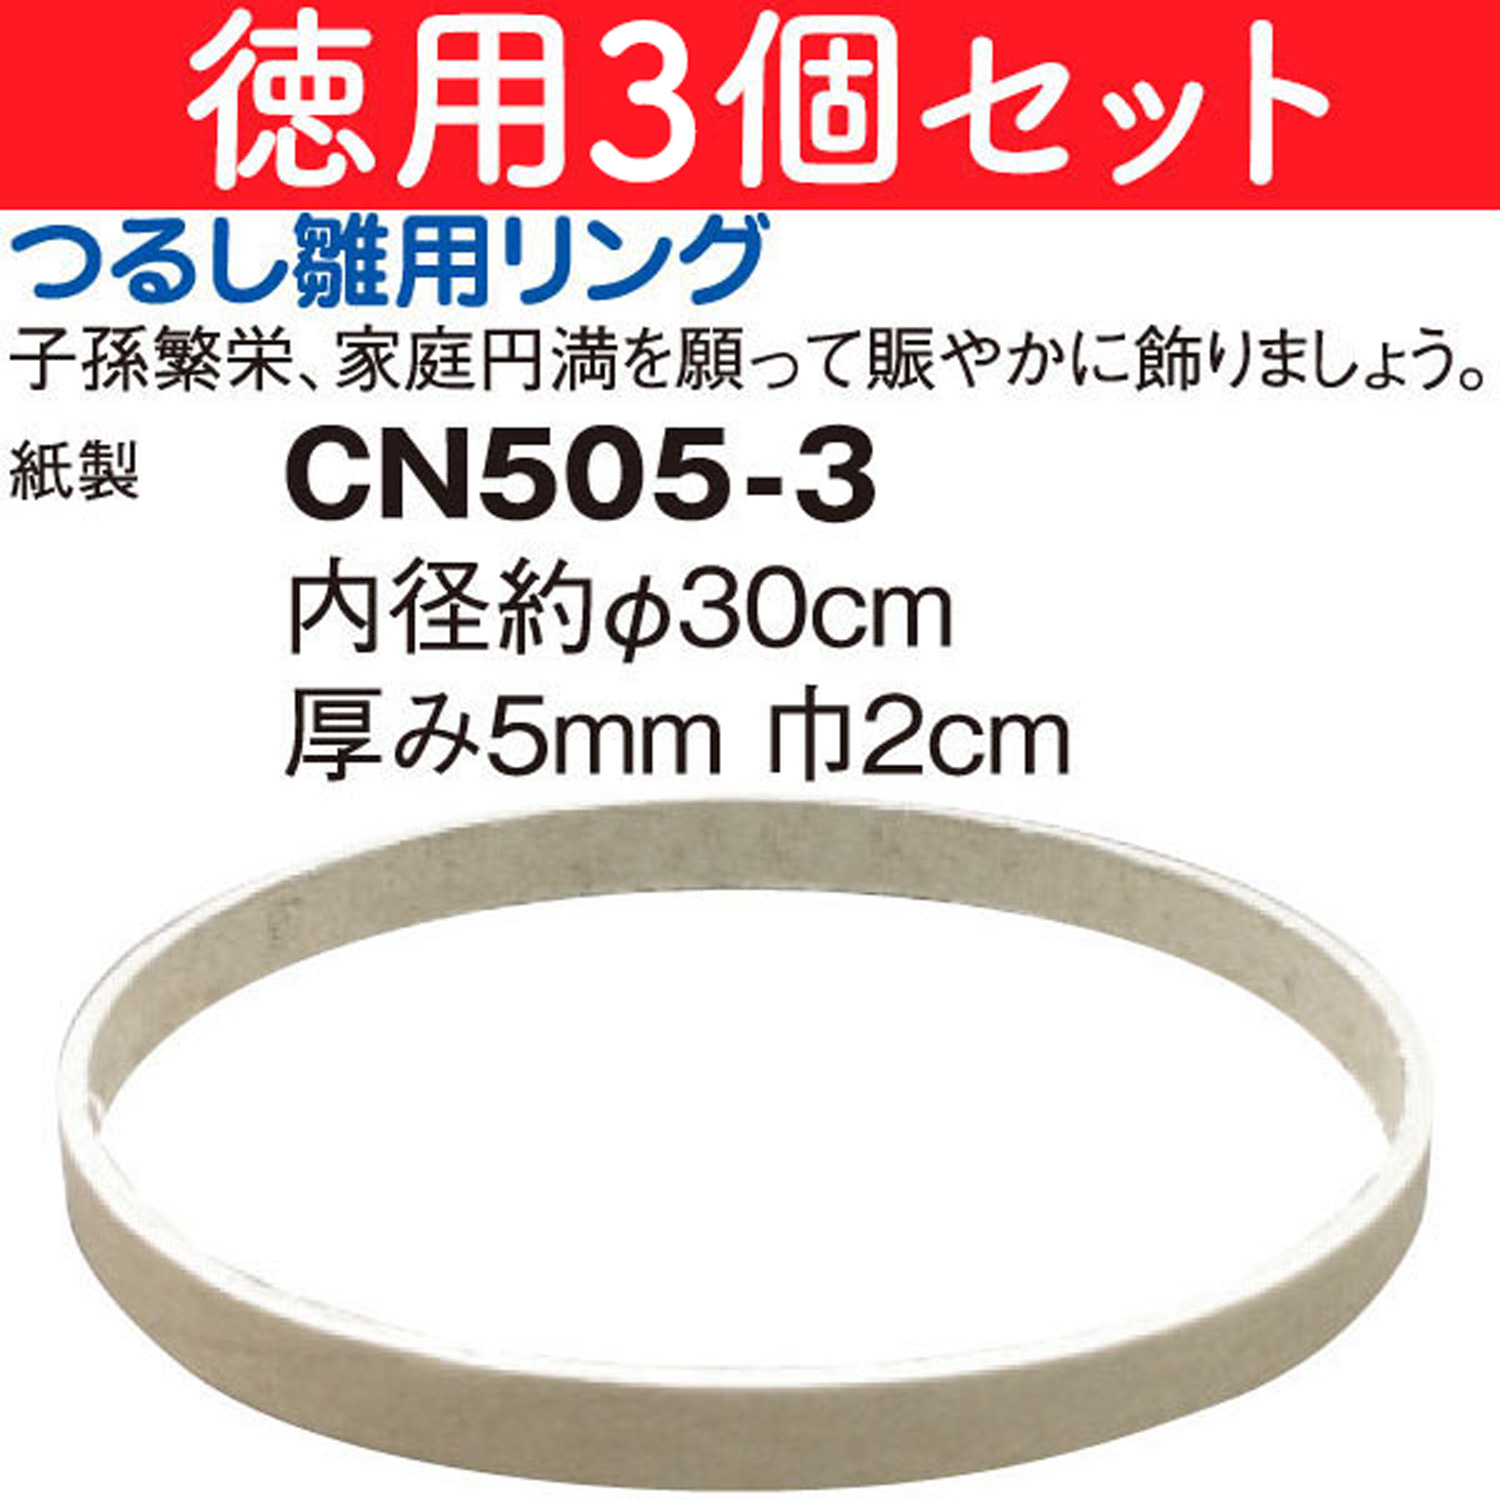 CN505-3 Special) Decorative Rings 3pcs Value Pack (pack)